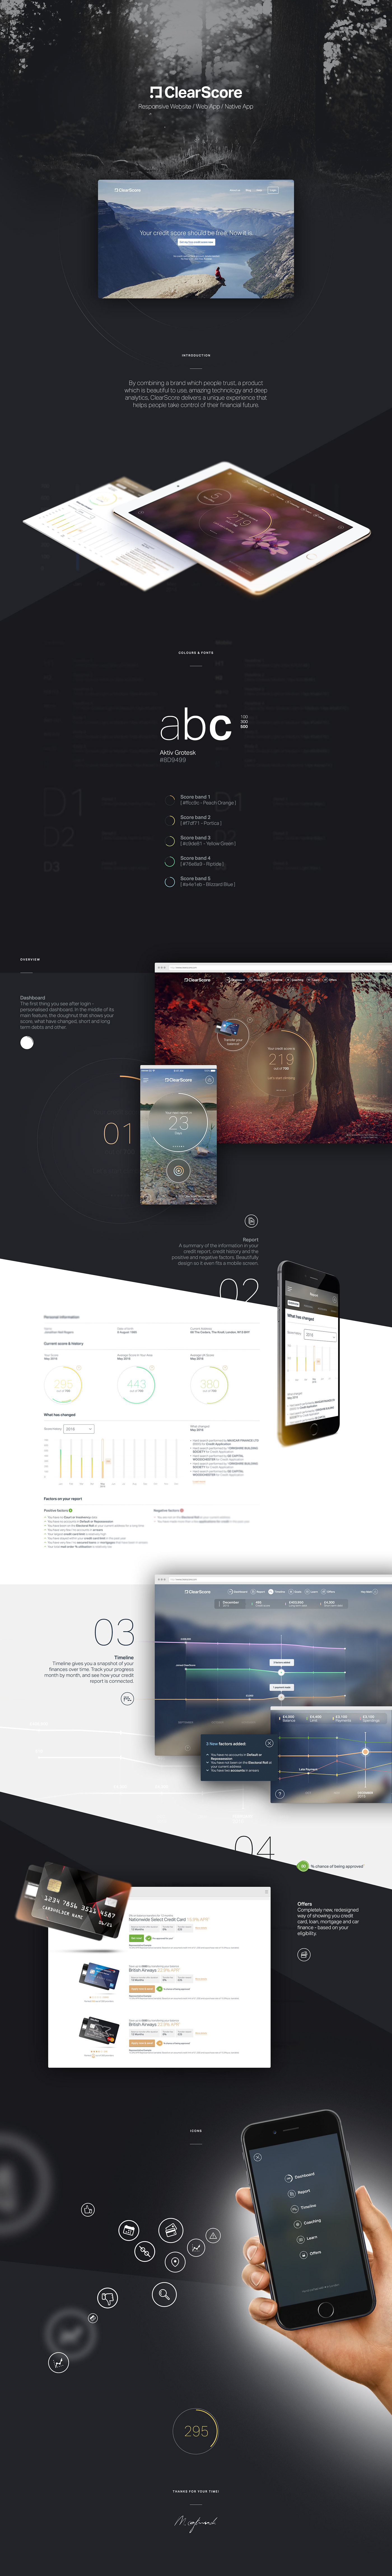 dashboard chart UI landing page clearscore icons iphone app Website